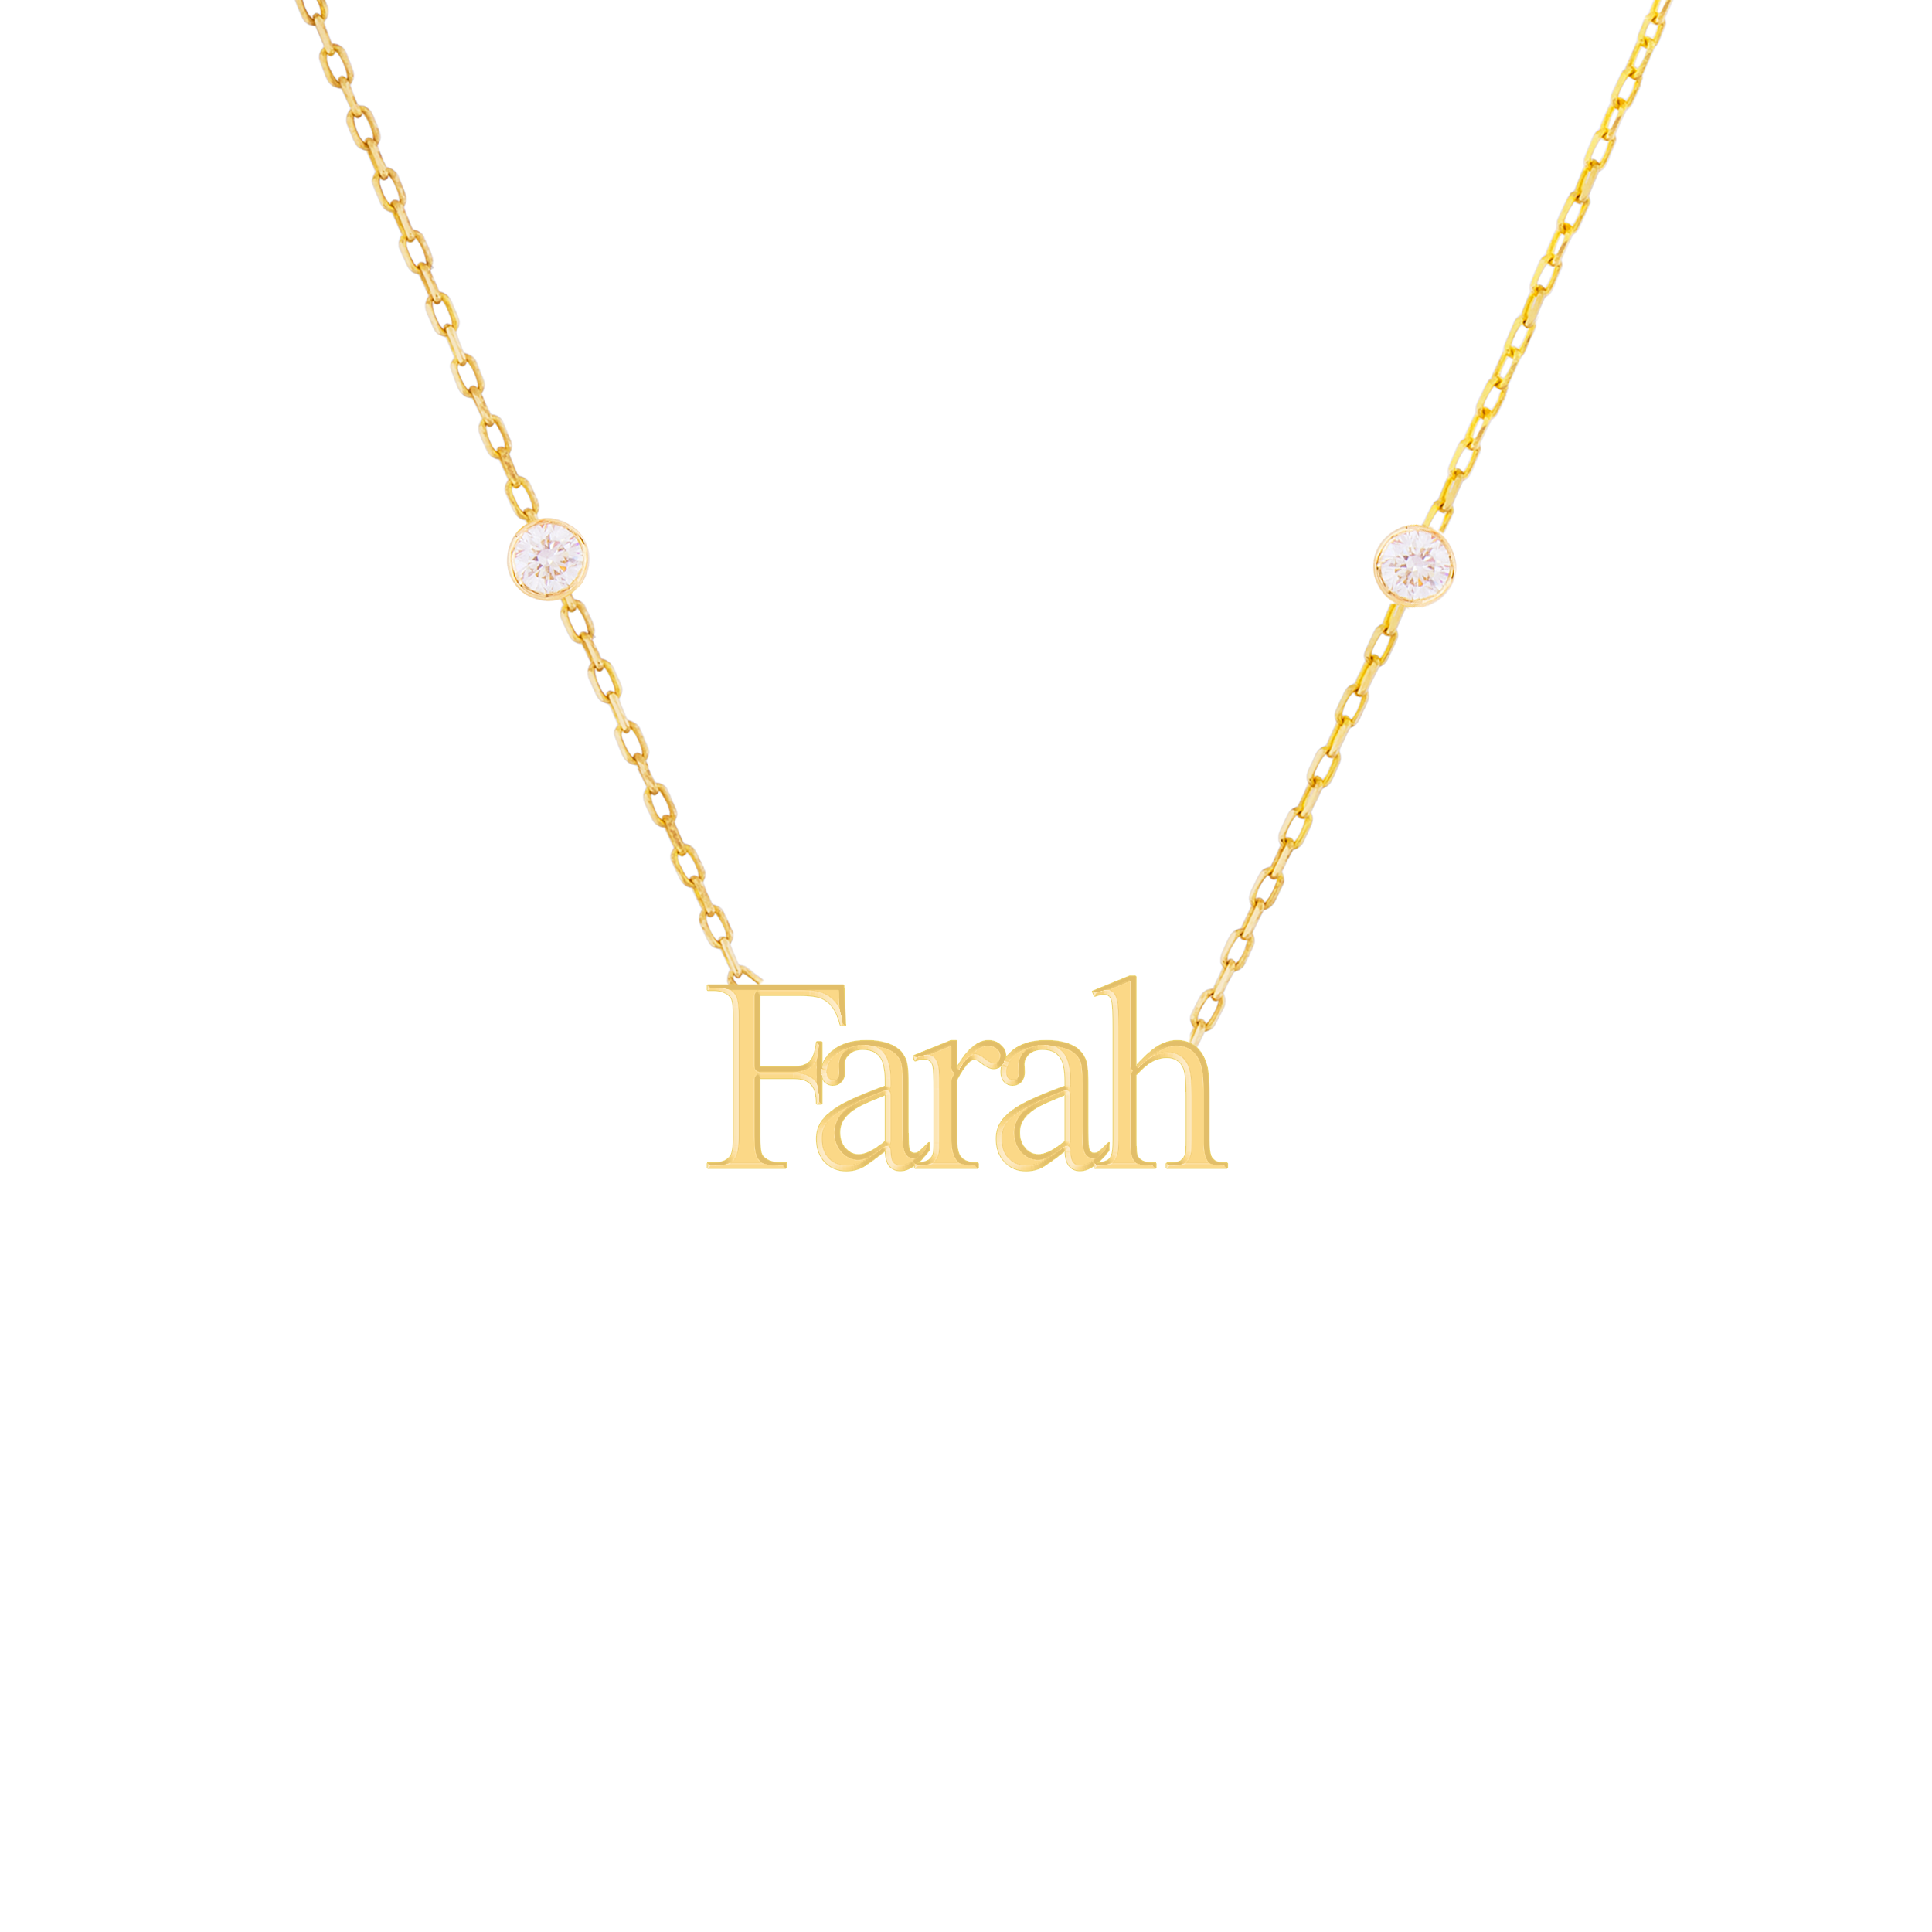 english name necklace in gold with diamonds